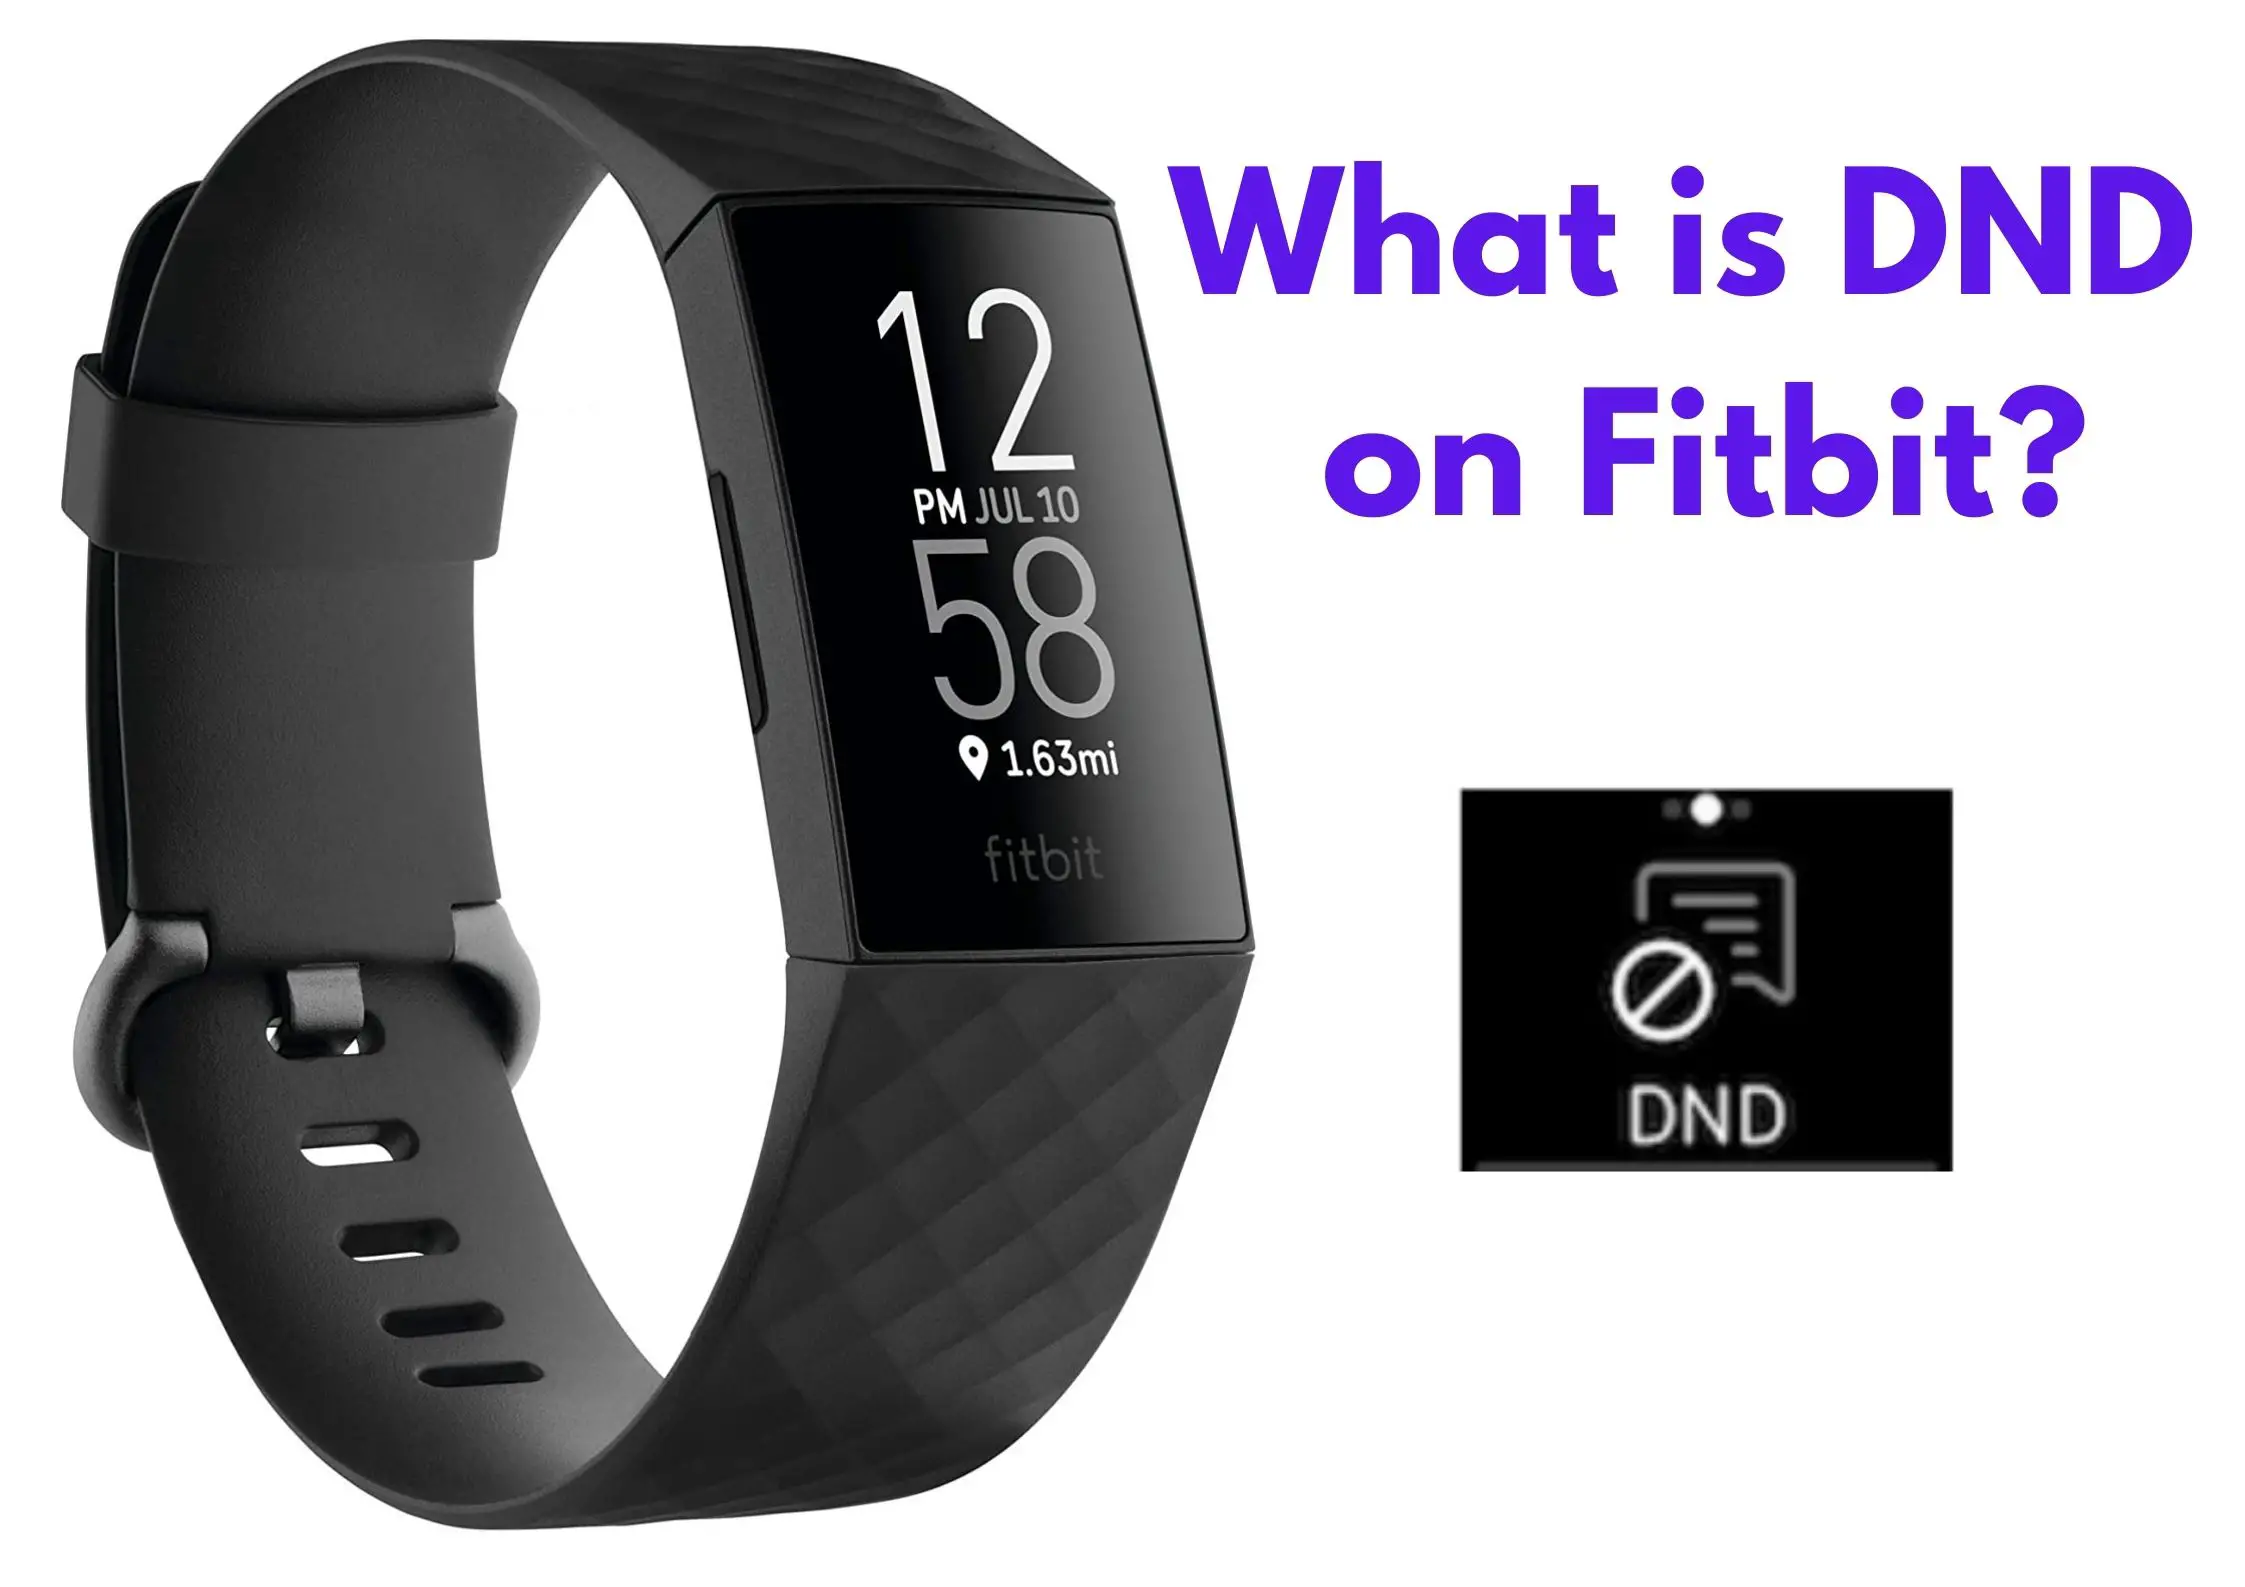 What is DND on Fitbit?